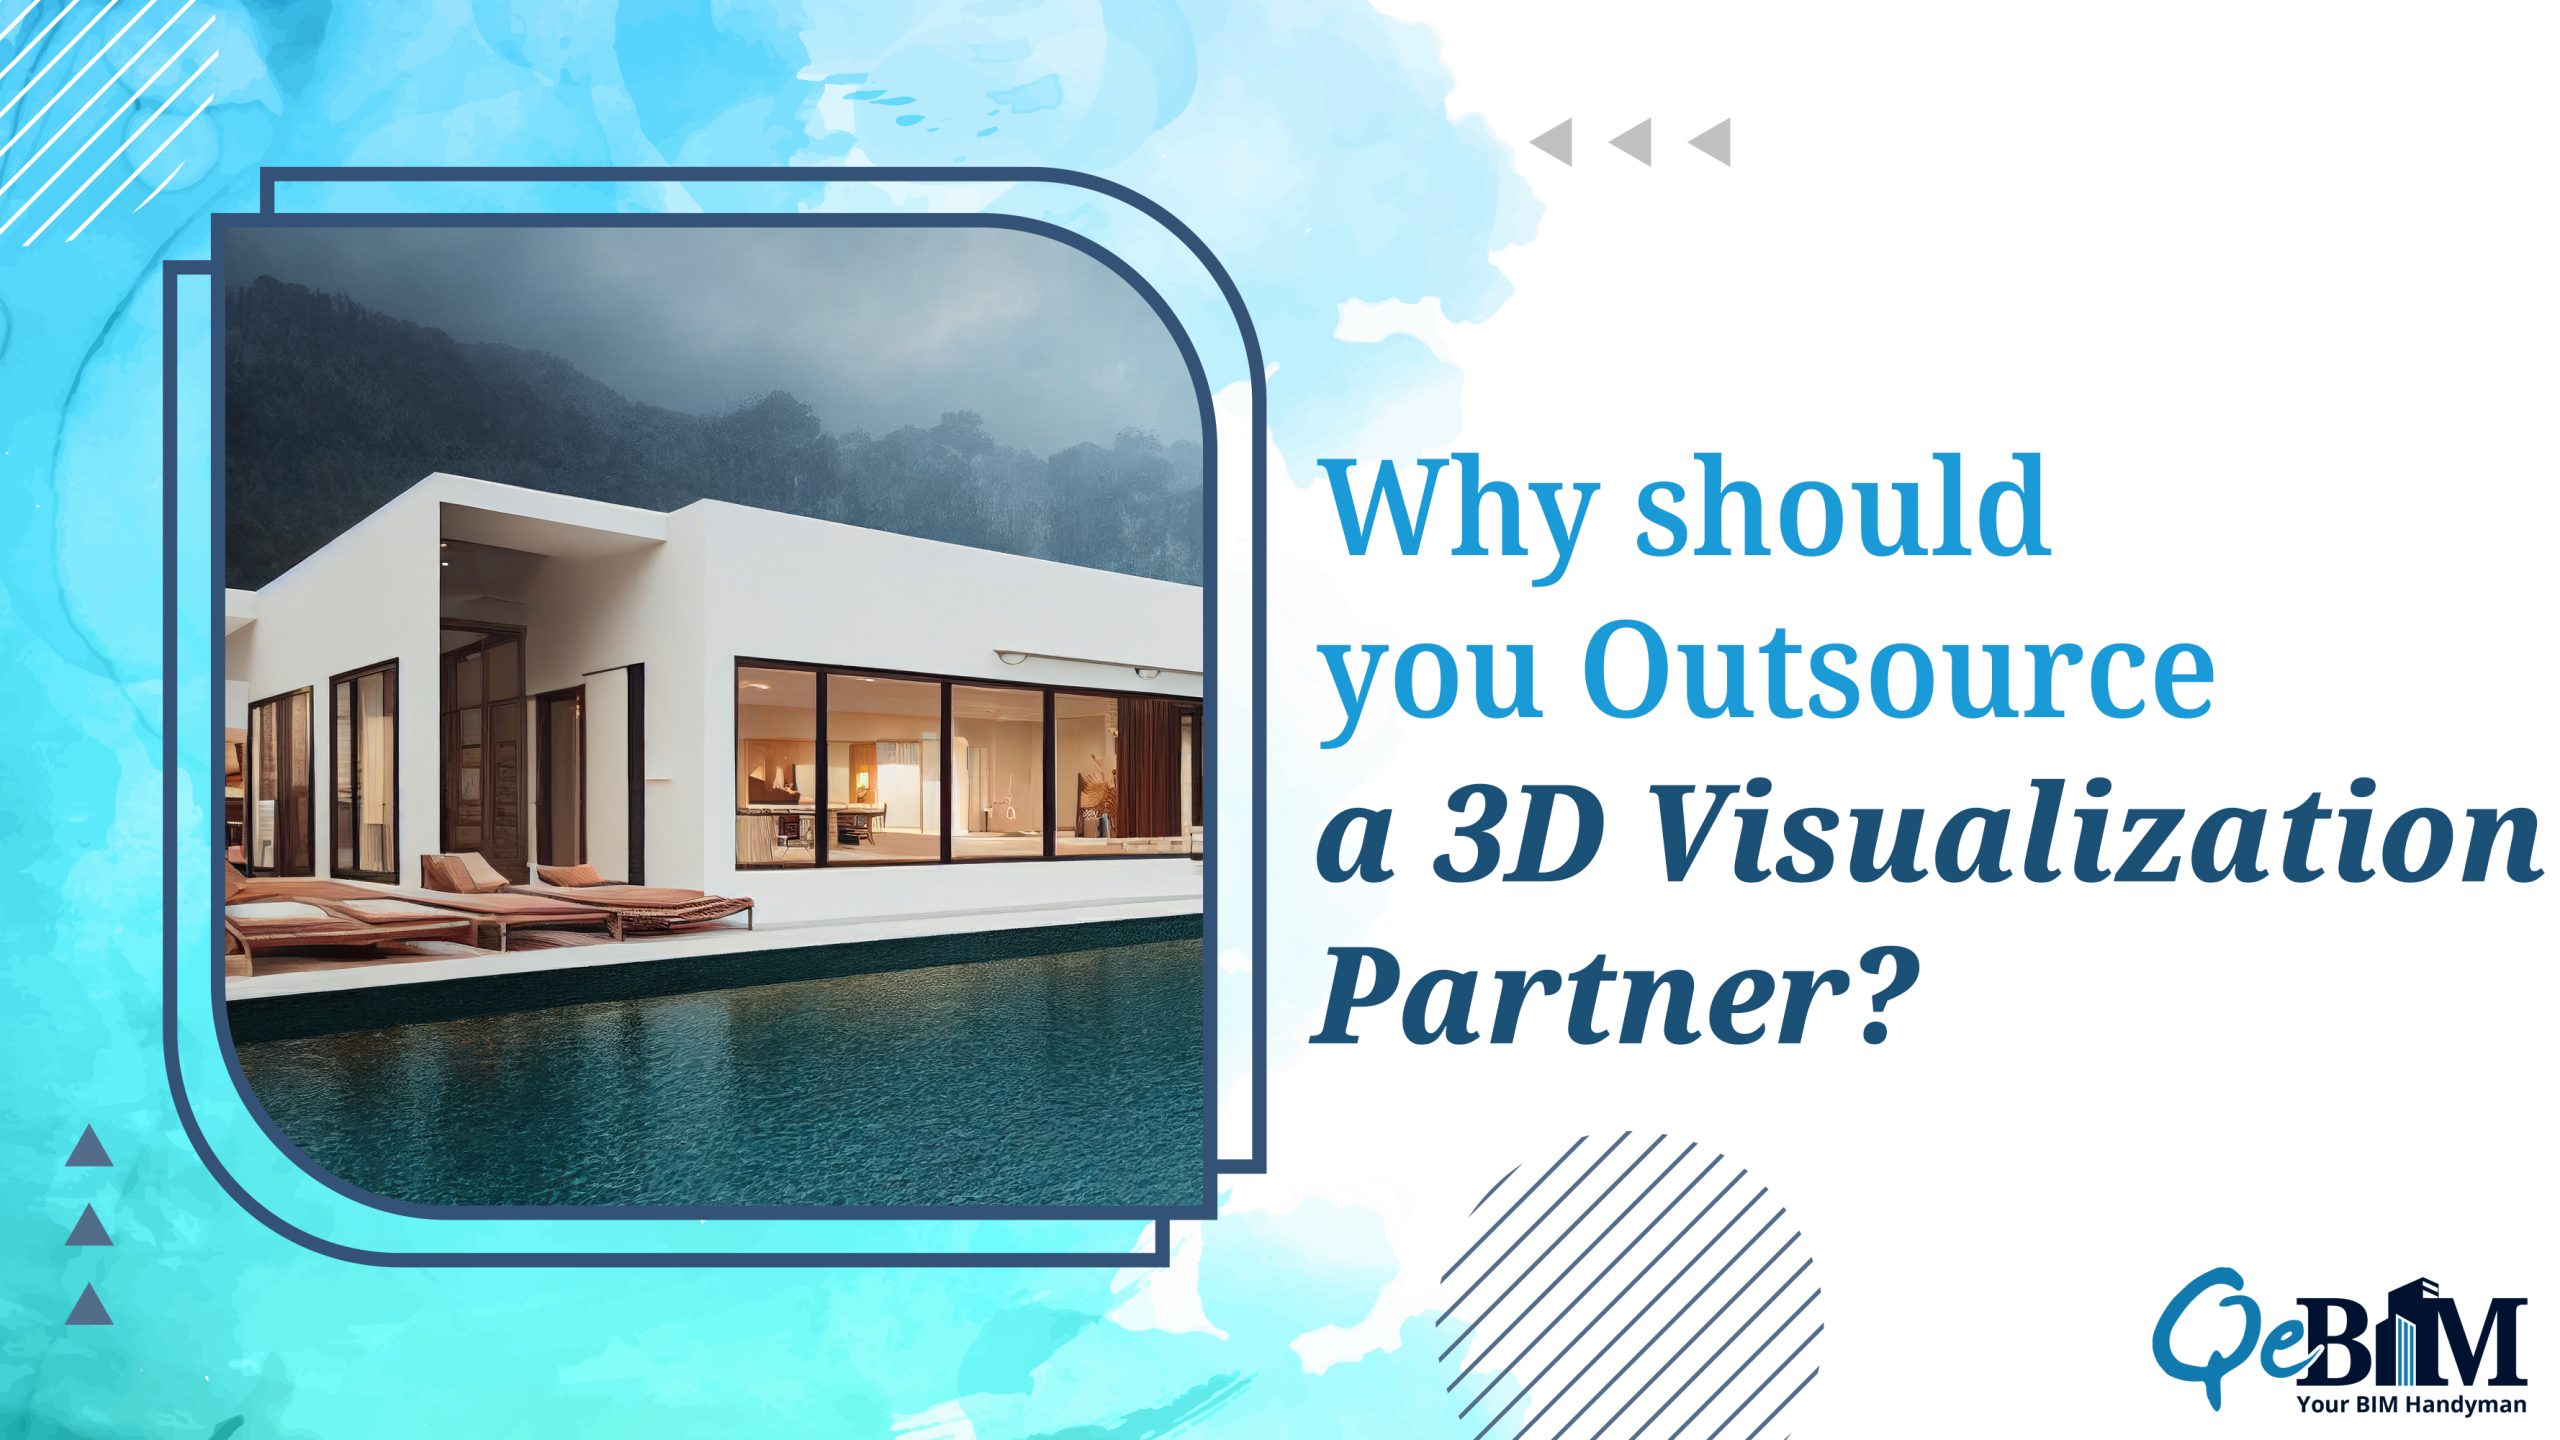 Why should you Outsource a 3D Visualization Partner?